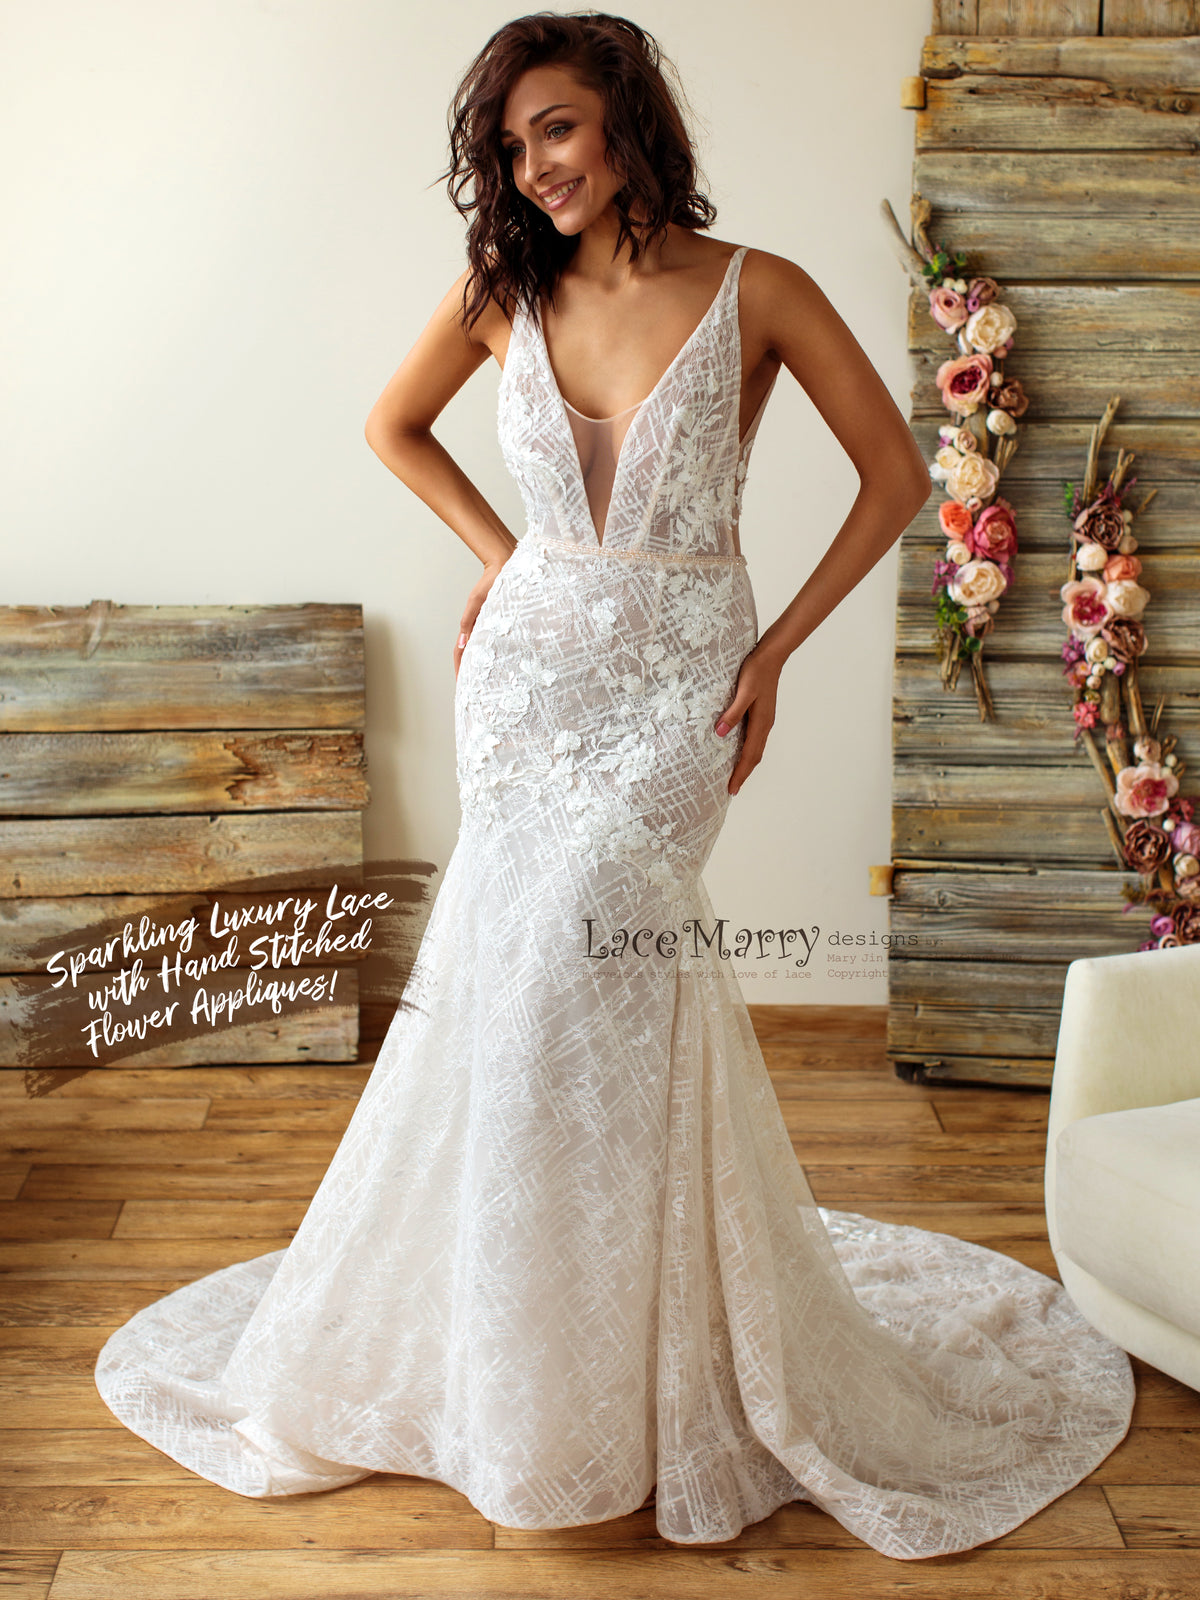 Mermaid Wedding Dress from Sparkly Geometric Lace